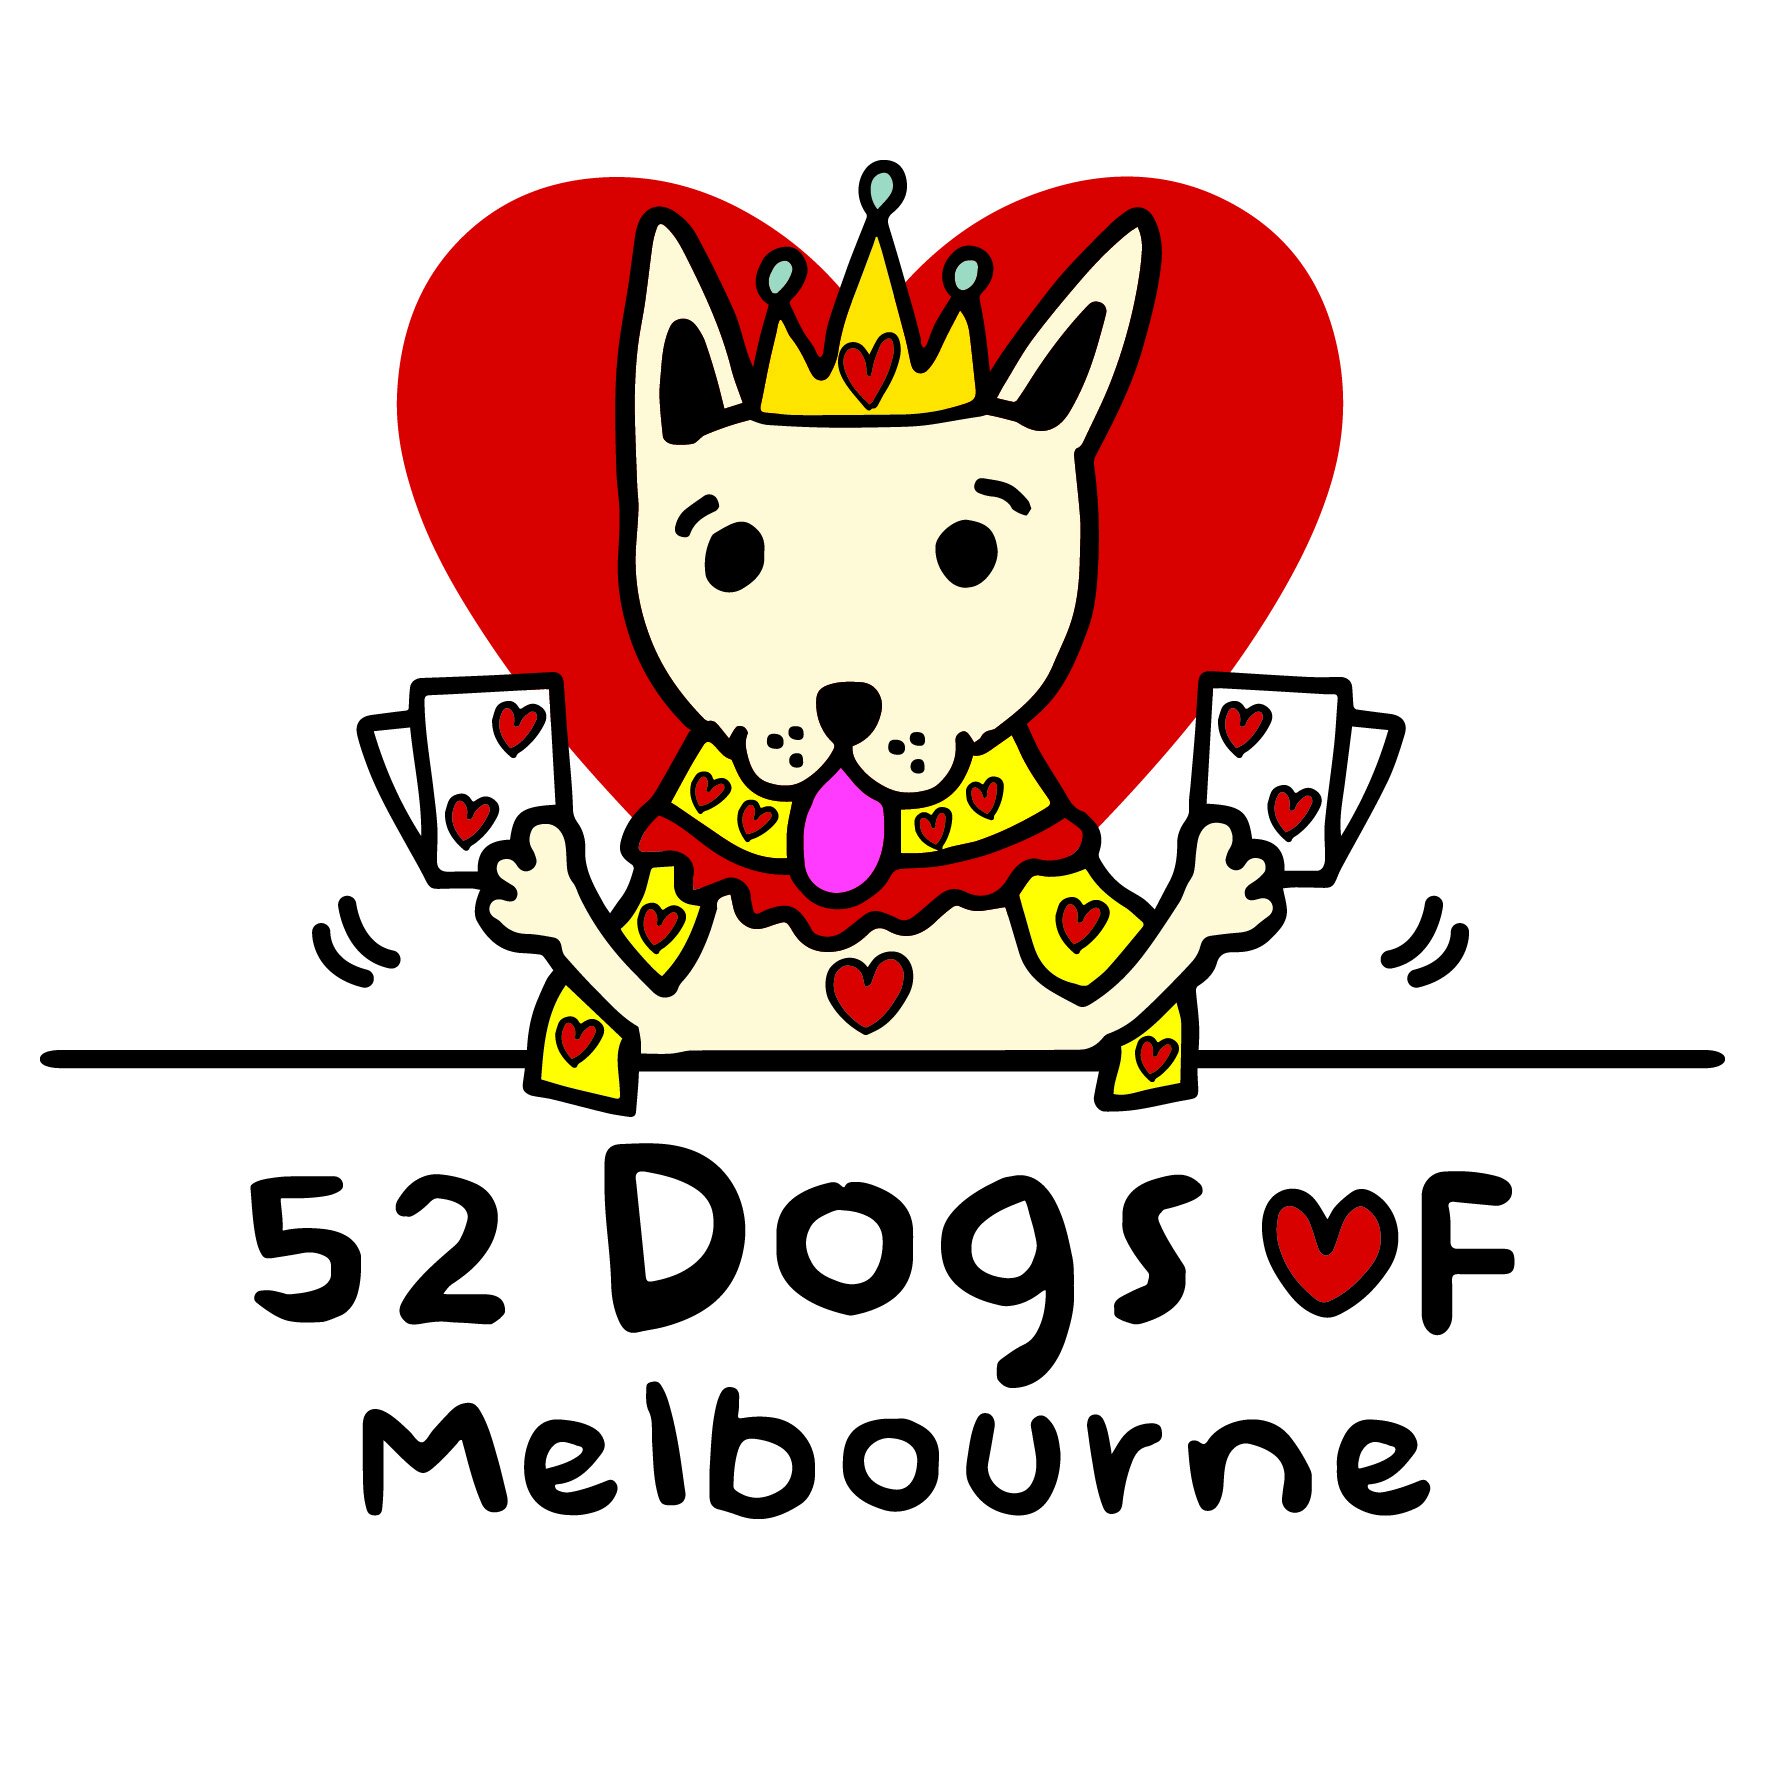 52 Dogs of Melbourne.jpg